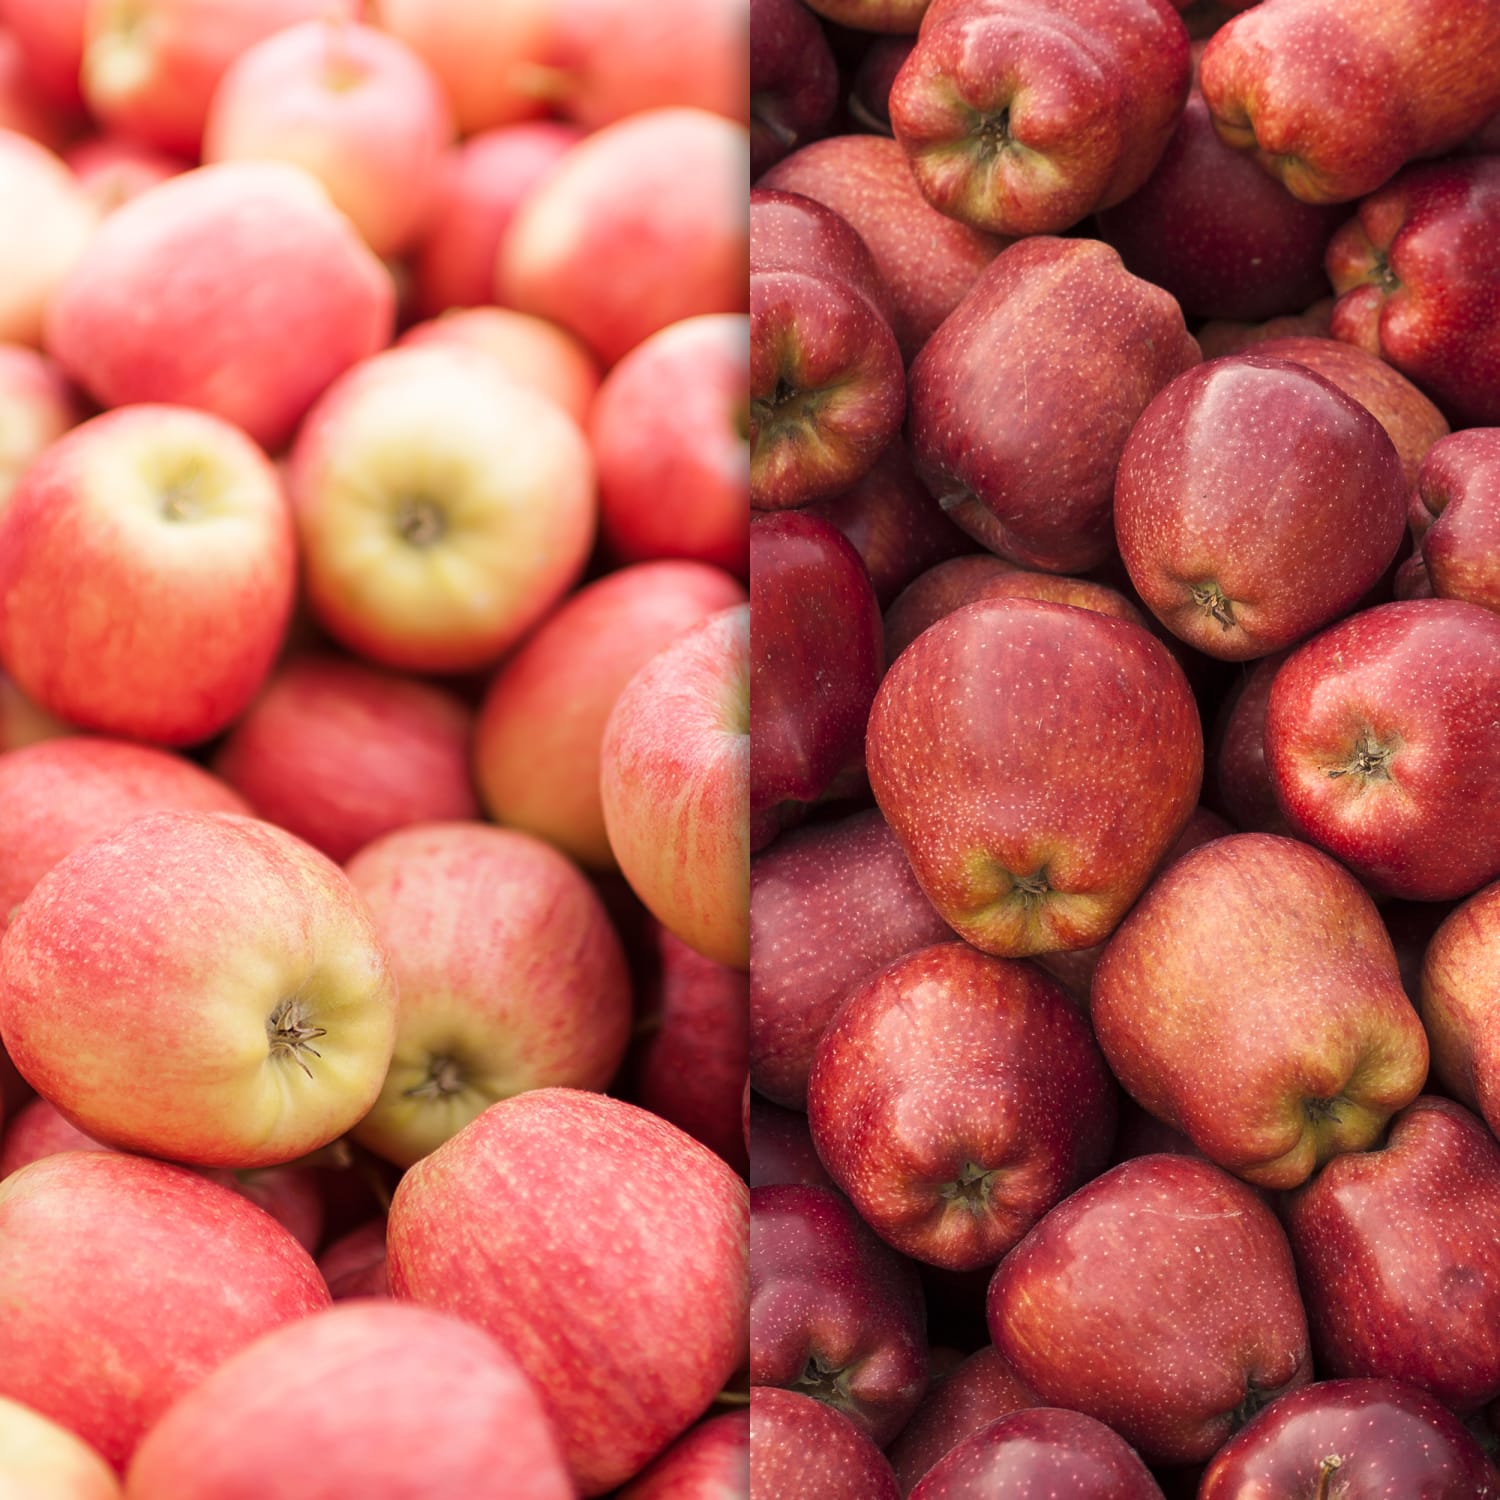 https://media-cldnry.s-nbcnews.com/image/upload/newscms/2018_35/1364592/red-delicious-apples-today-inline-03-180831.jpg